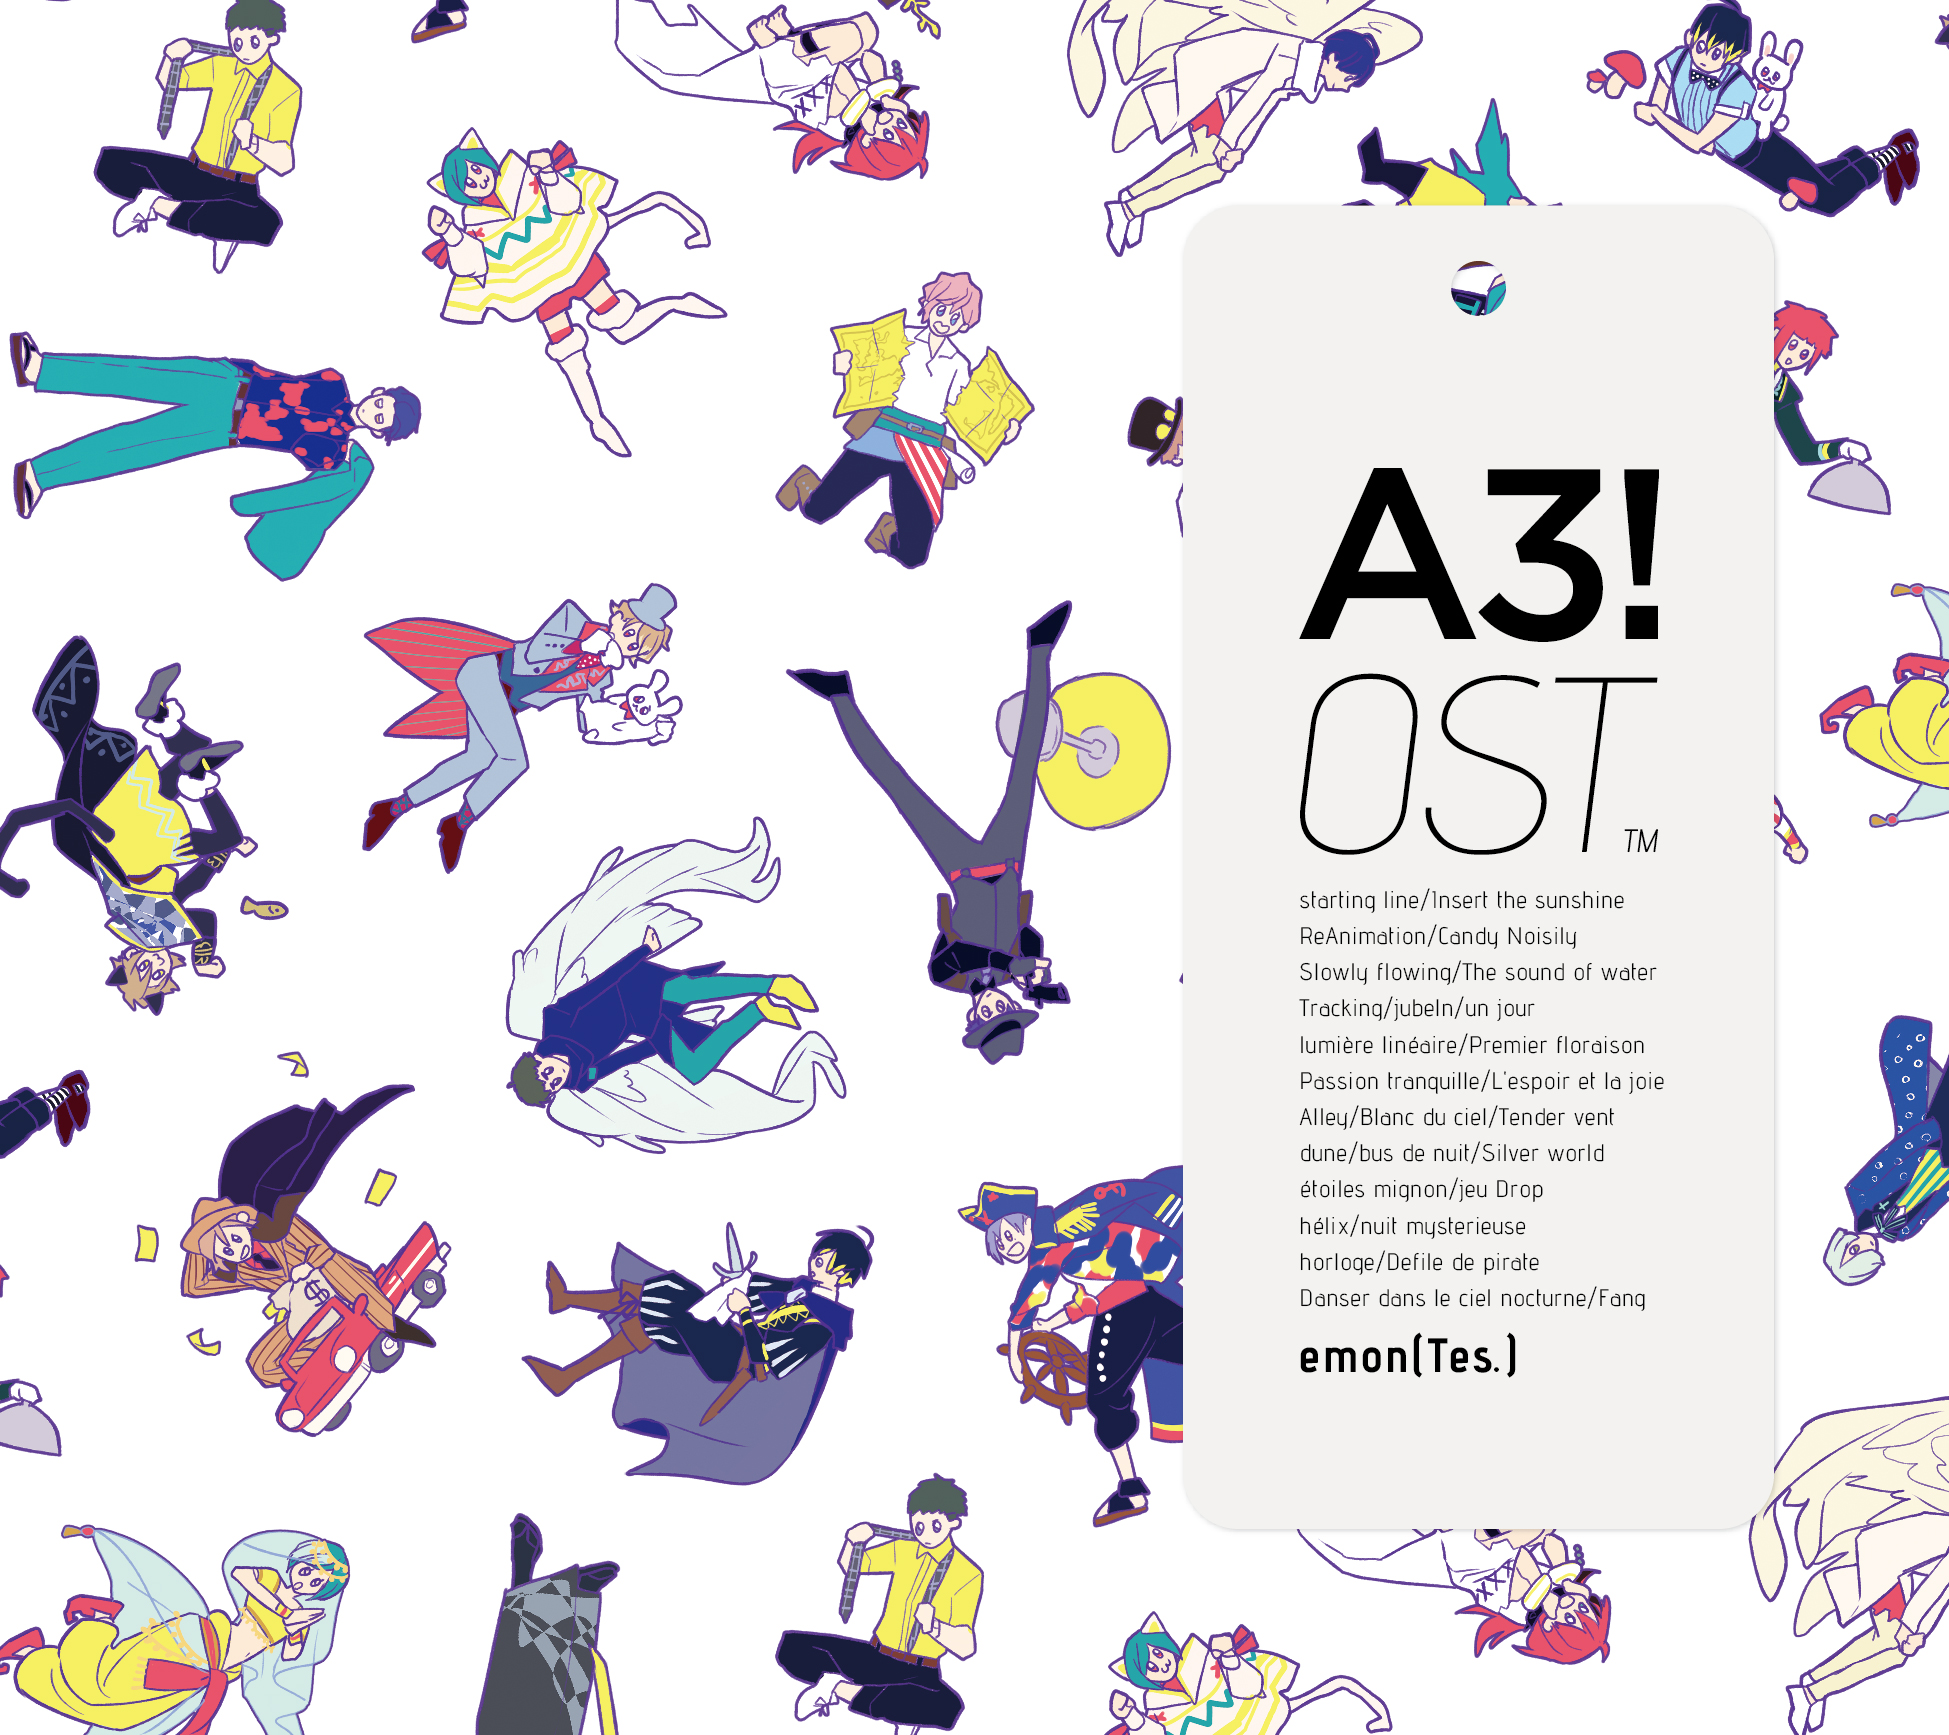 【A3!】A3! OST Music：emon(Tes.) (CD only)